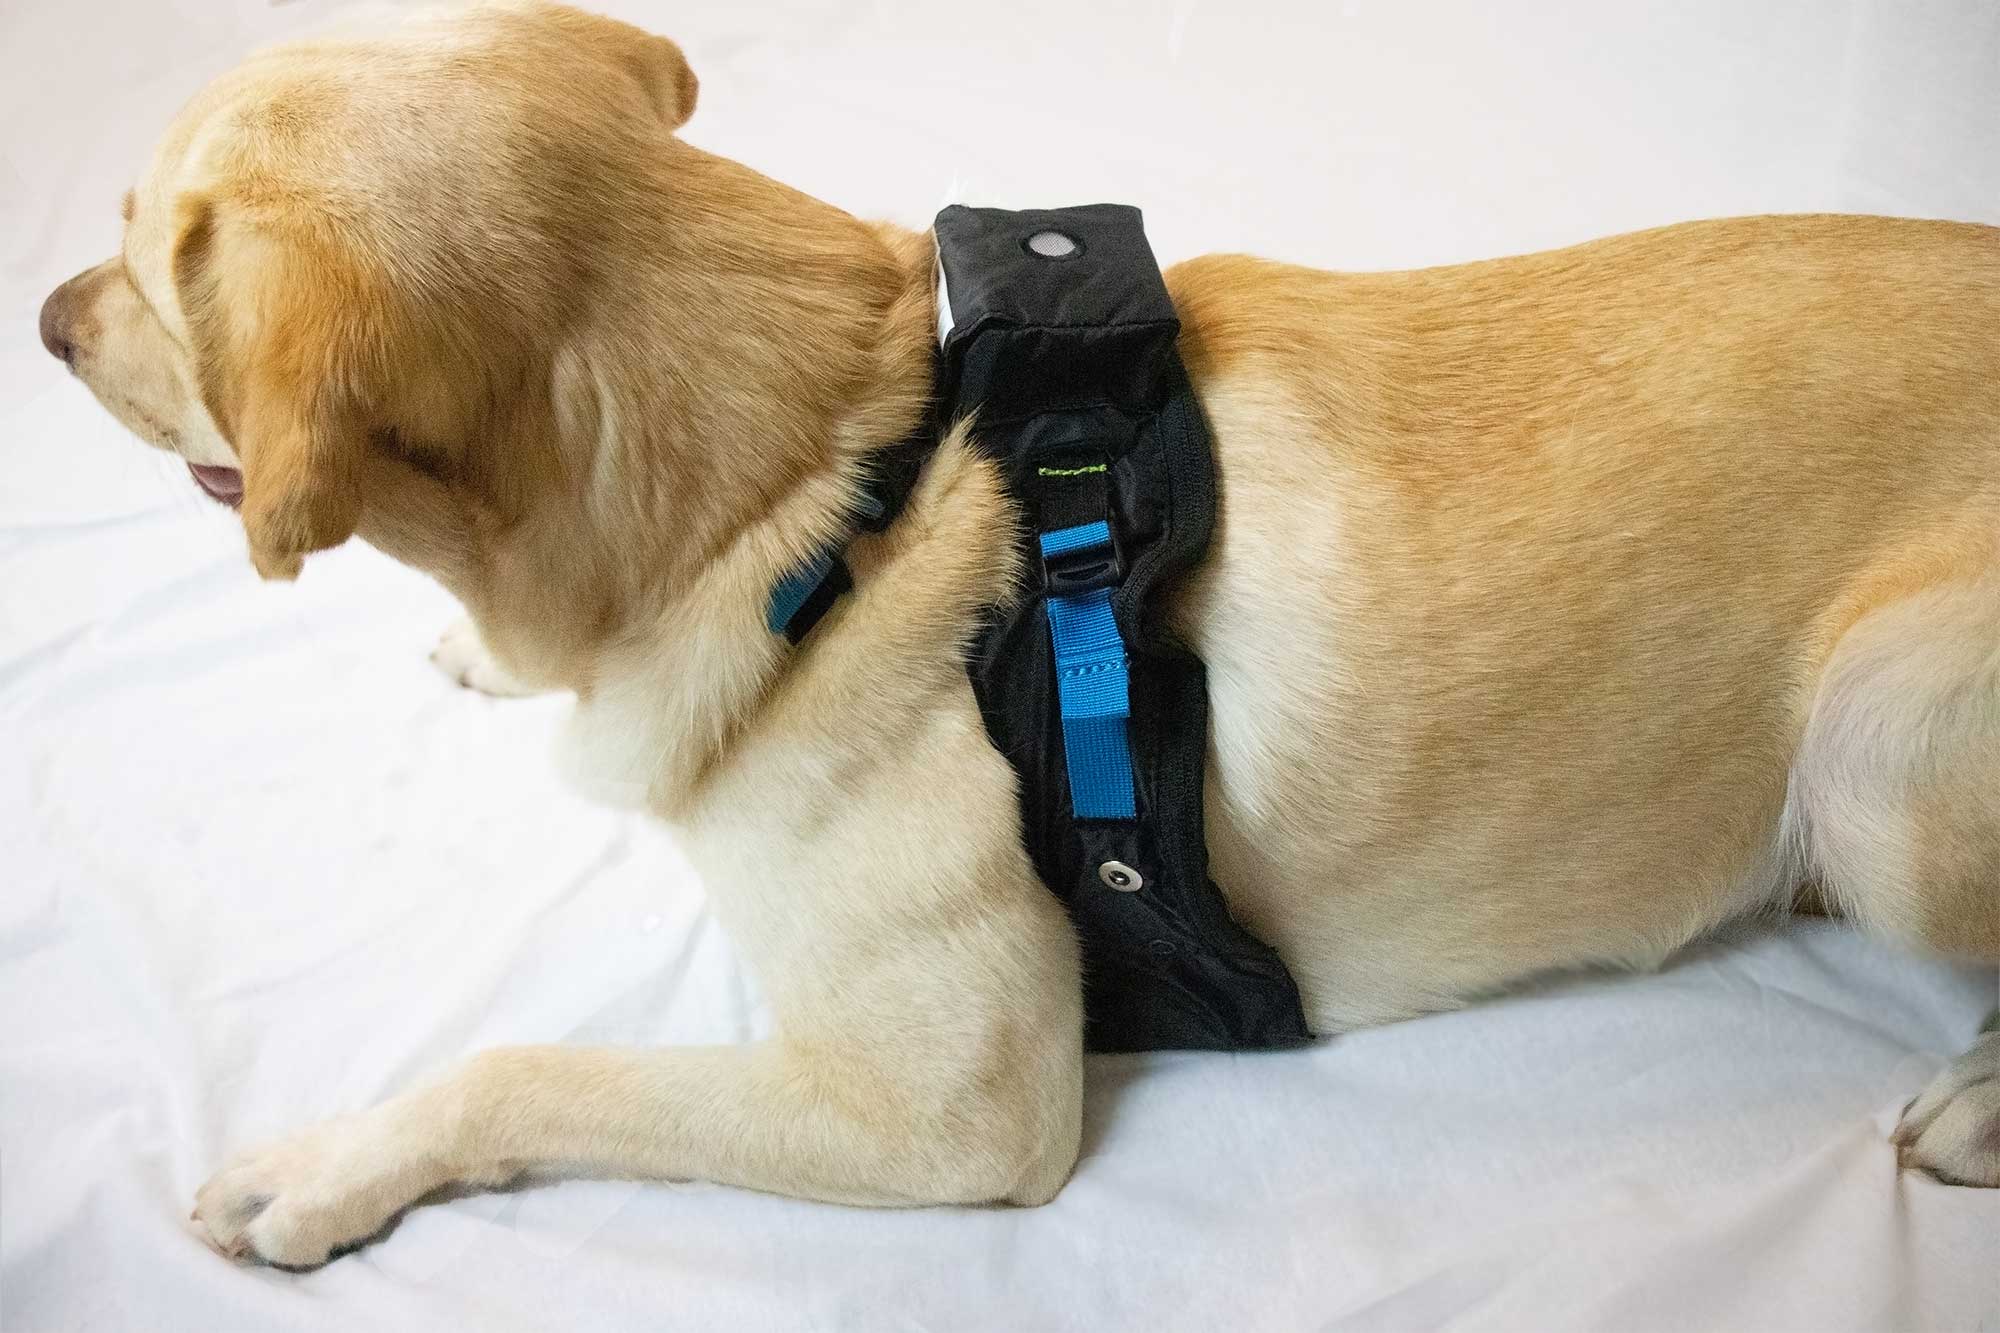 remote pet health monitoring system